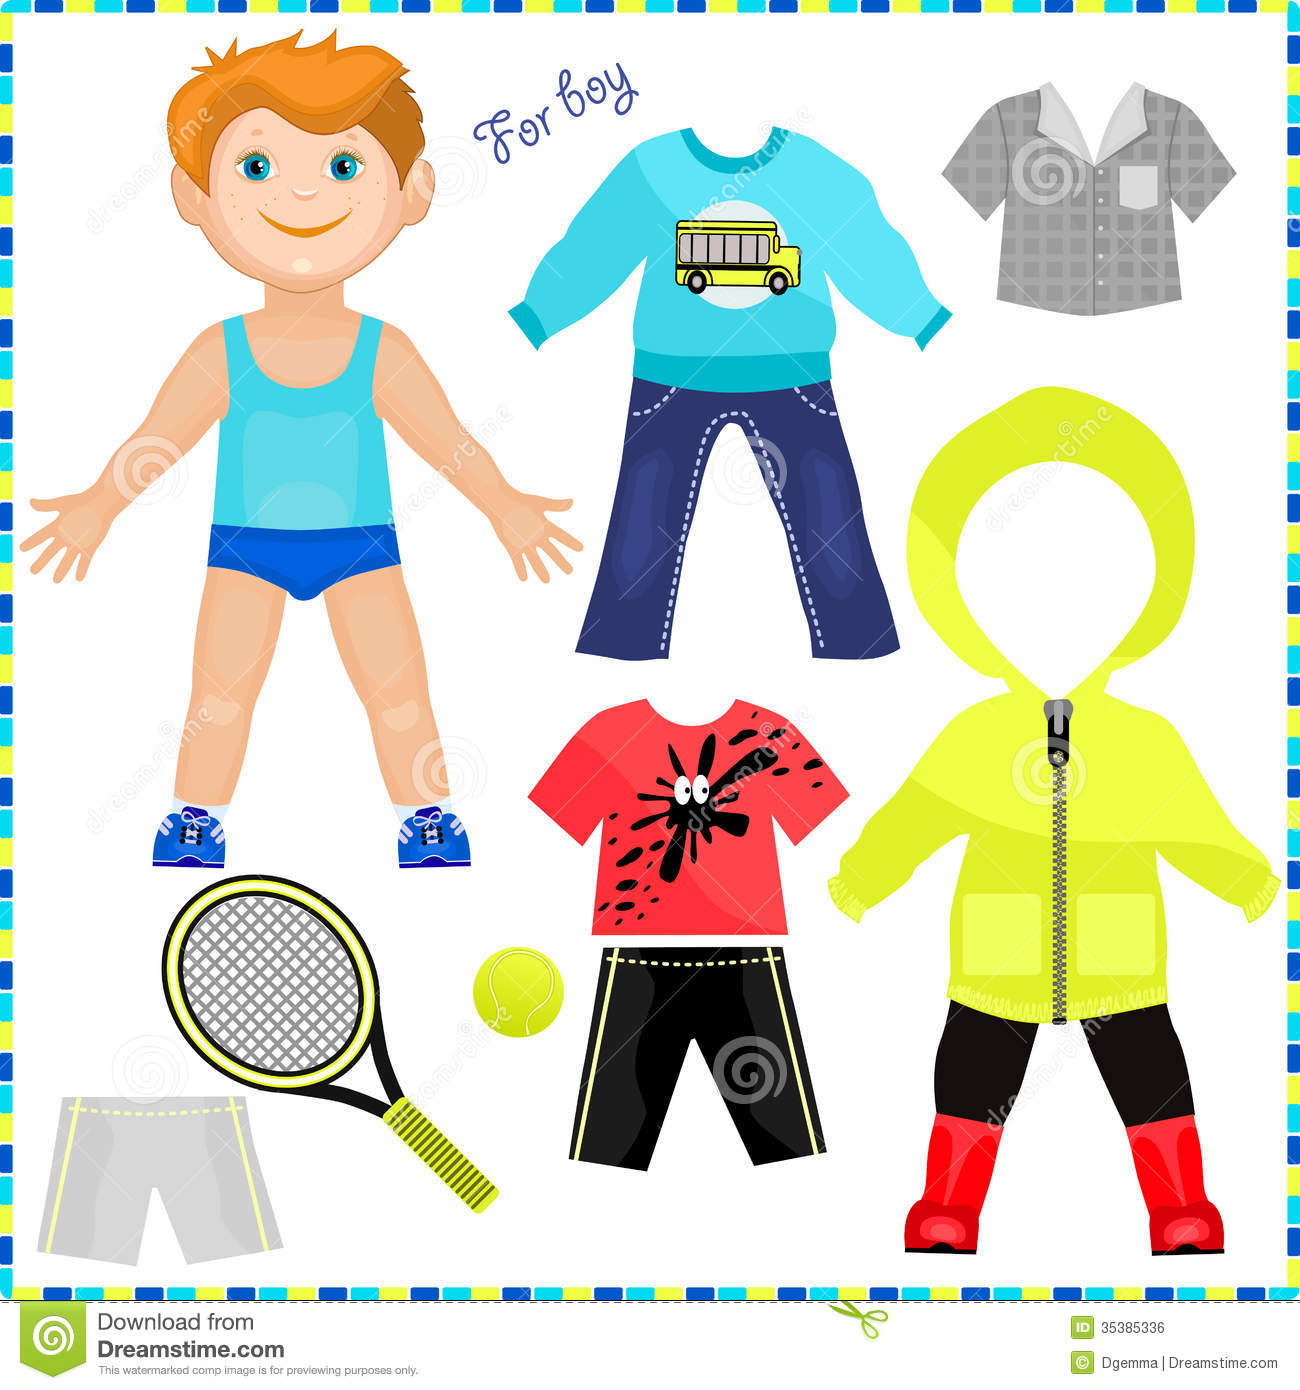 7 Best Images Of Printable Boy Clothes Winter Clothes Coloring Pages